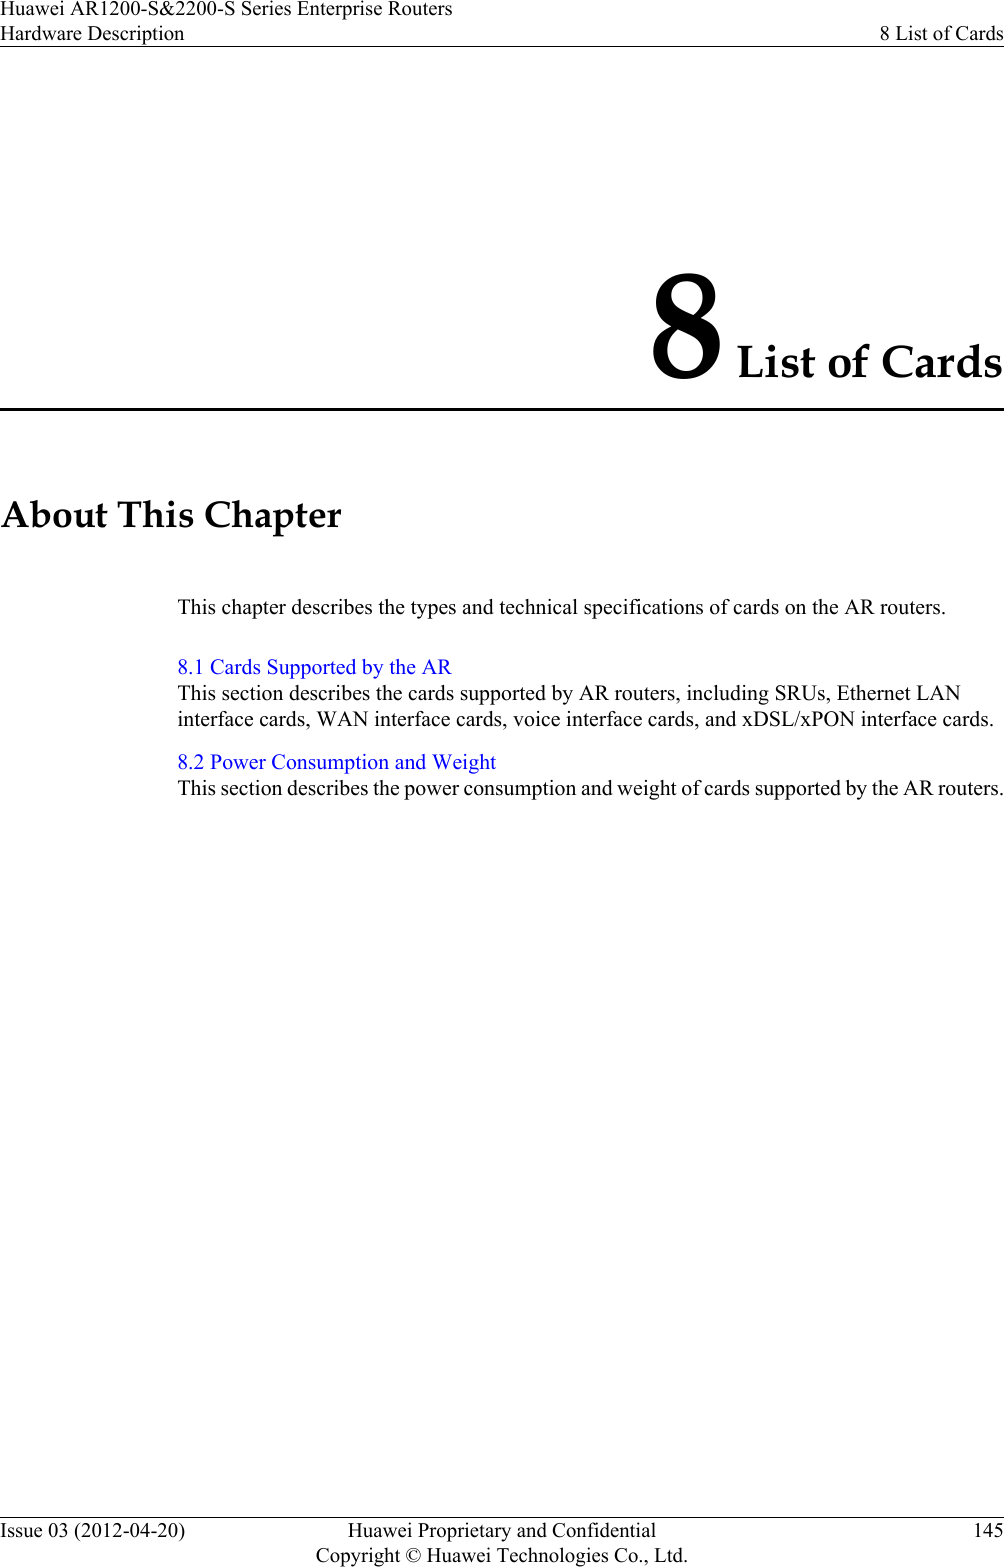 8 List of CardsAbout This ChapterThis chapter describes the types and technical specifications of cards on the AR routers.8.1 Cards Supported by the ARThis section describes the cards supported by AR routers, including SRUs, Ethernet LANinterface cards, WAN interface cards, voice interface cards, and xDSL/xPON interface cards.8.2 Power Consumption and WeightThis section describes the power consumption and weight of cards supported by the AR routers.Huawei AR1200-S&amp;2200-S Series Enterprise RoutersHardware Description 8 List of CardsIssue 03 (2012-04-20) Huawei Proprietary and ConfidentialCopyright © Huawei Technologies Co., Ltd.145